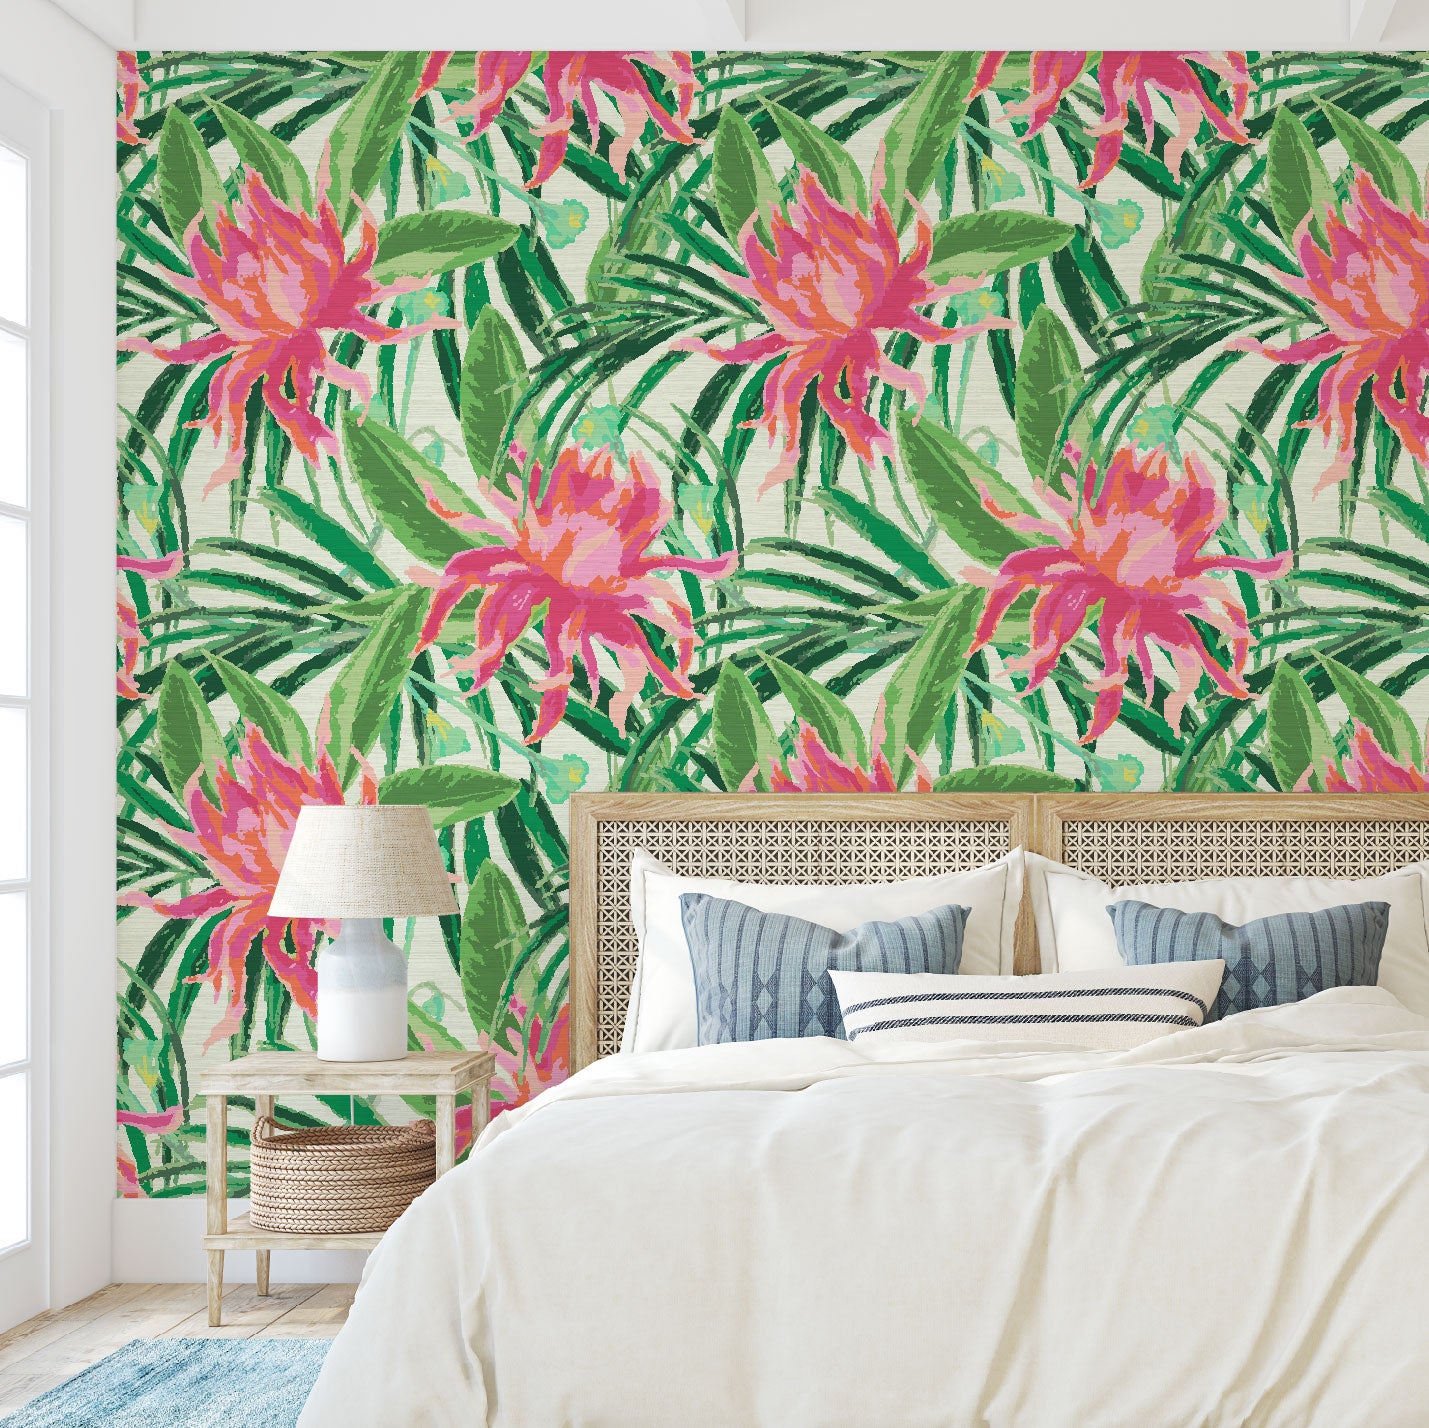 Bedroom with grasscloth wallpaper with cream based featuring oversized painterly tropical flowers and palm leafs in striking shades of pink and orange and leafs in shades of bright green